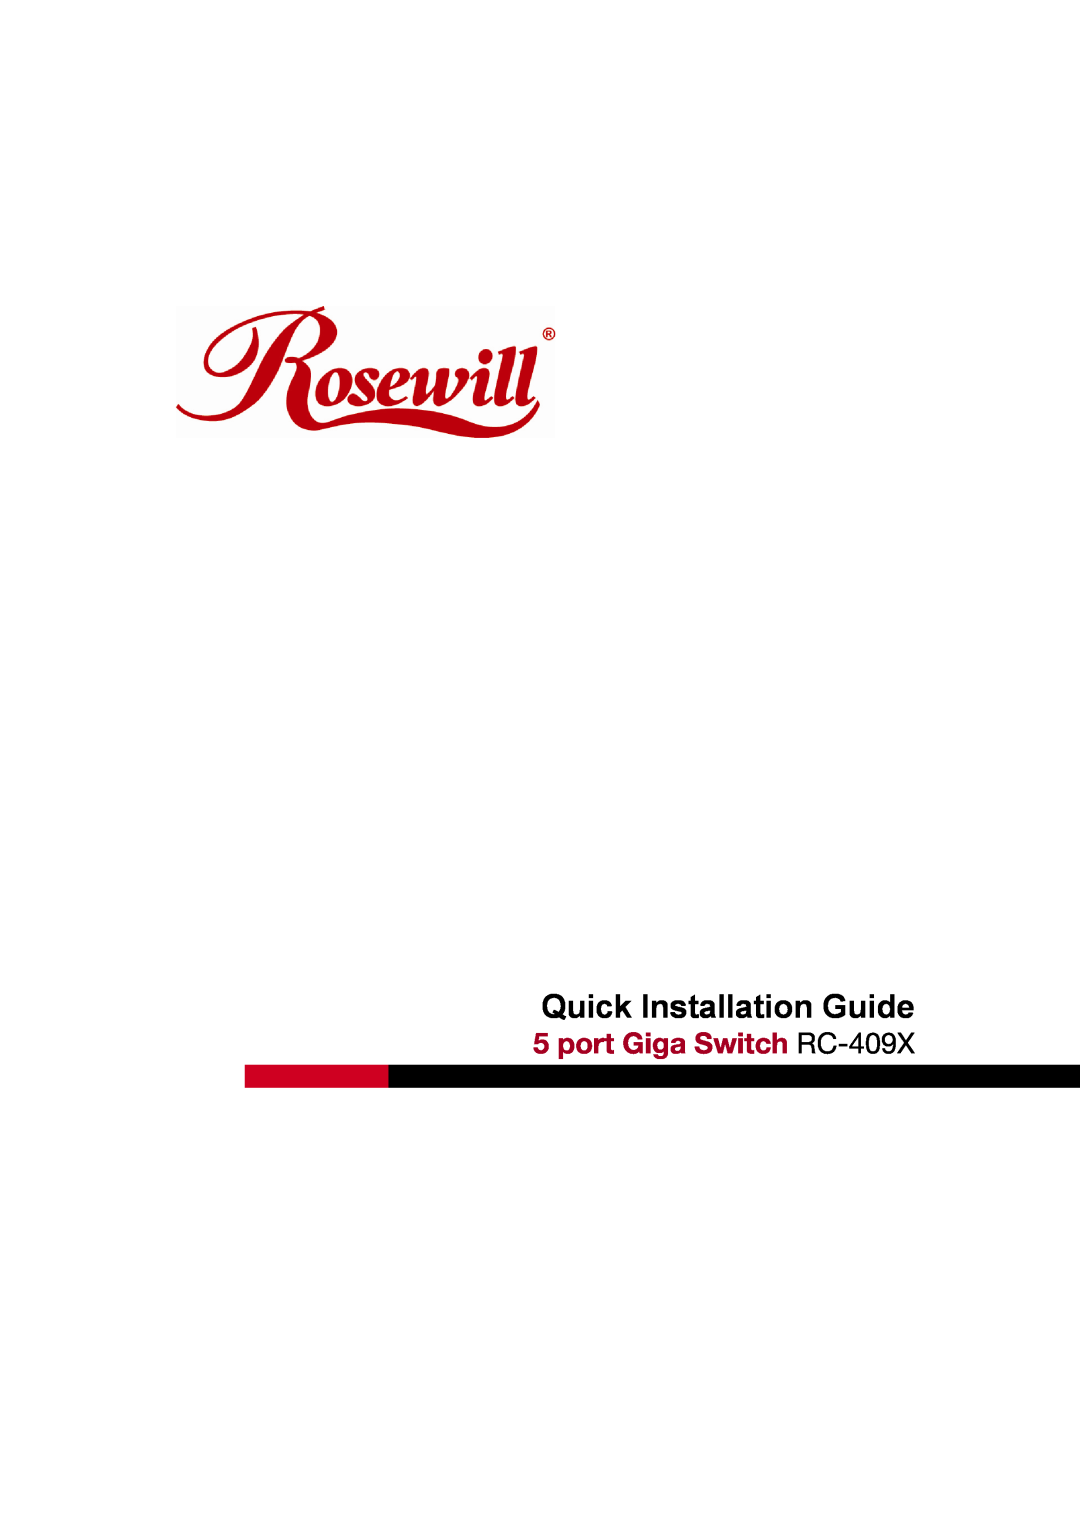 Rosewill manual Quick Installation Guide, port Giga Switch RC-409X 